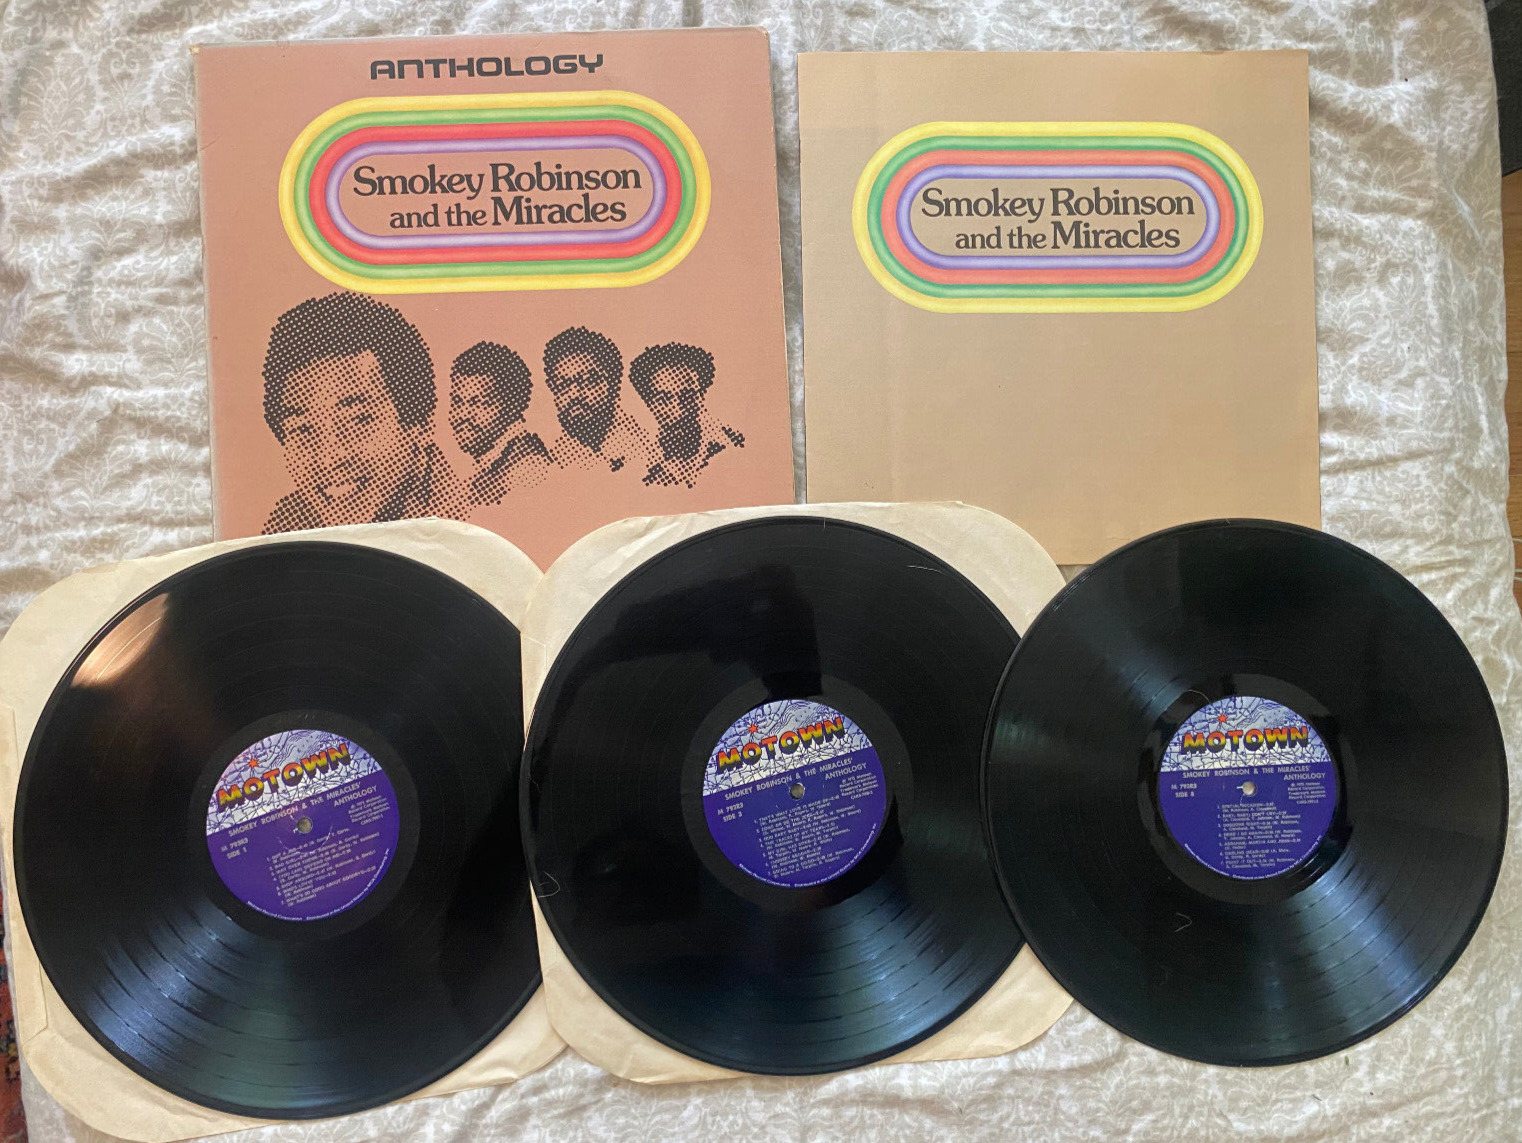 SMOKEY ROBINSON AND THE MIRACLES ANTHOLOGY 3LP '73 M793R3 MOTOWN COMP + BOOK EX